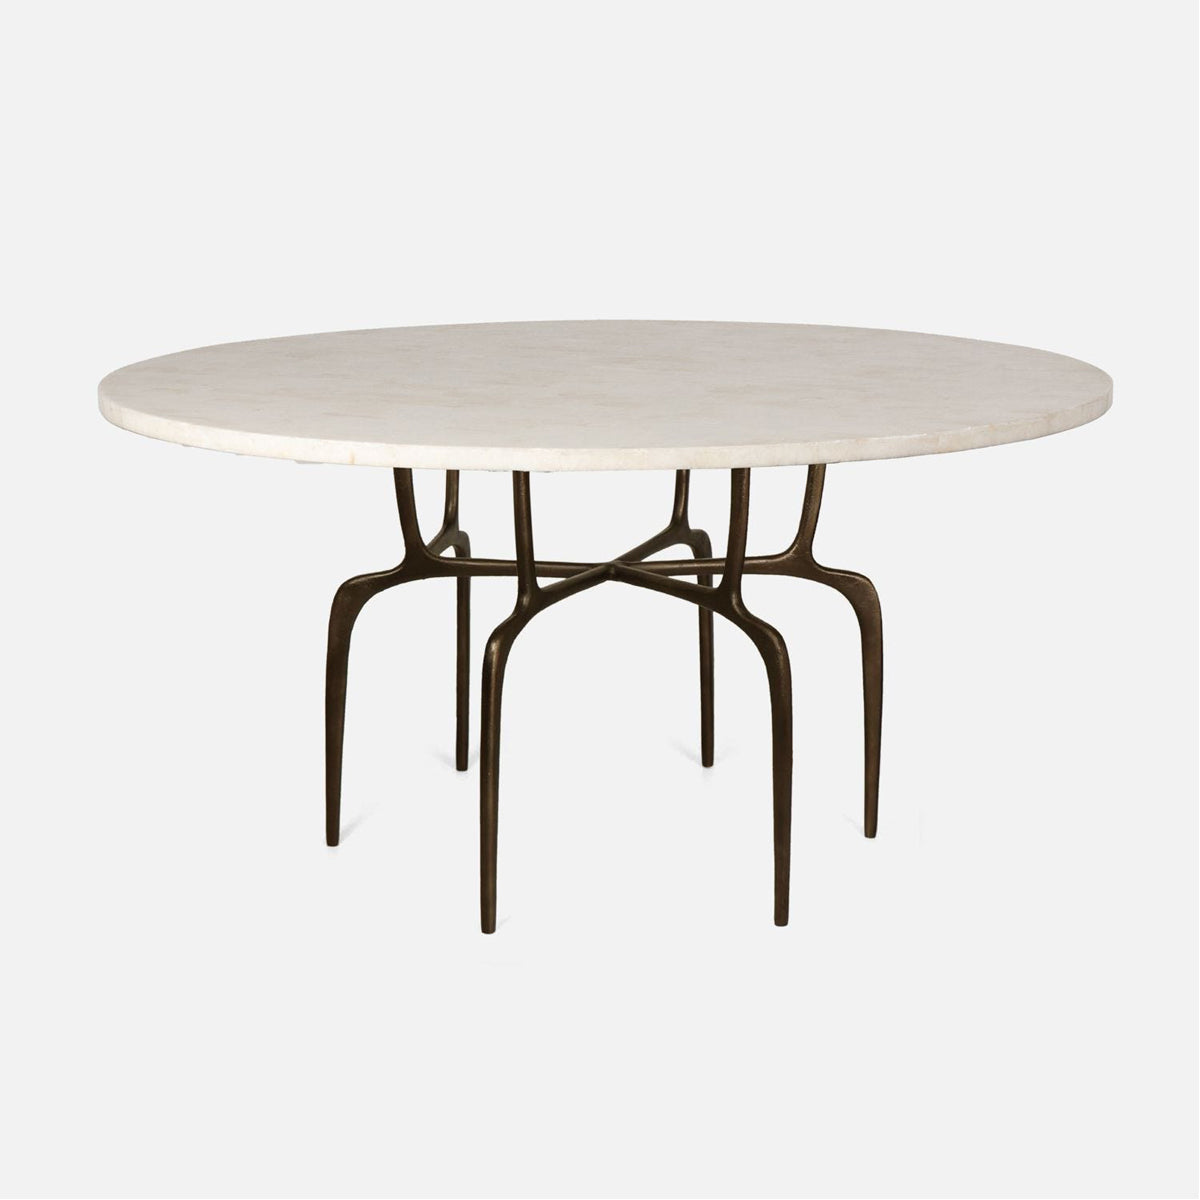 Made Goods Cyrano Metal Dining Table in Stone